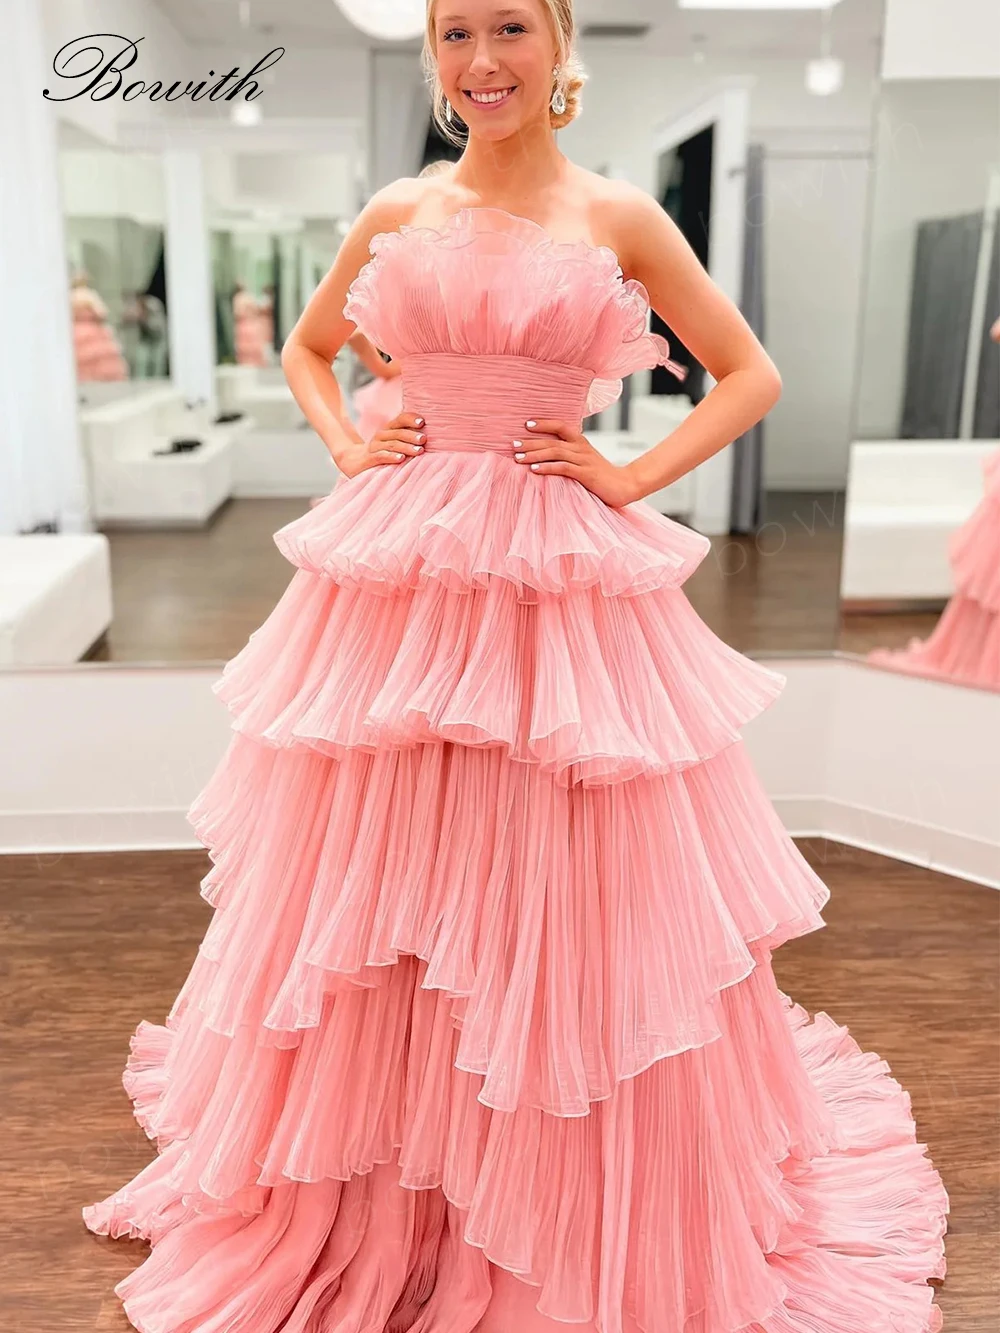 

Bowith Strapless Prom Dresses 2023 Puffy Evening Dresses for Women Luxury Formal Occasion Dresses A Line vestidos de fiesta